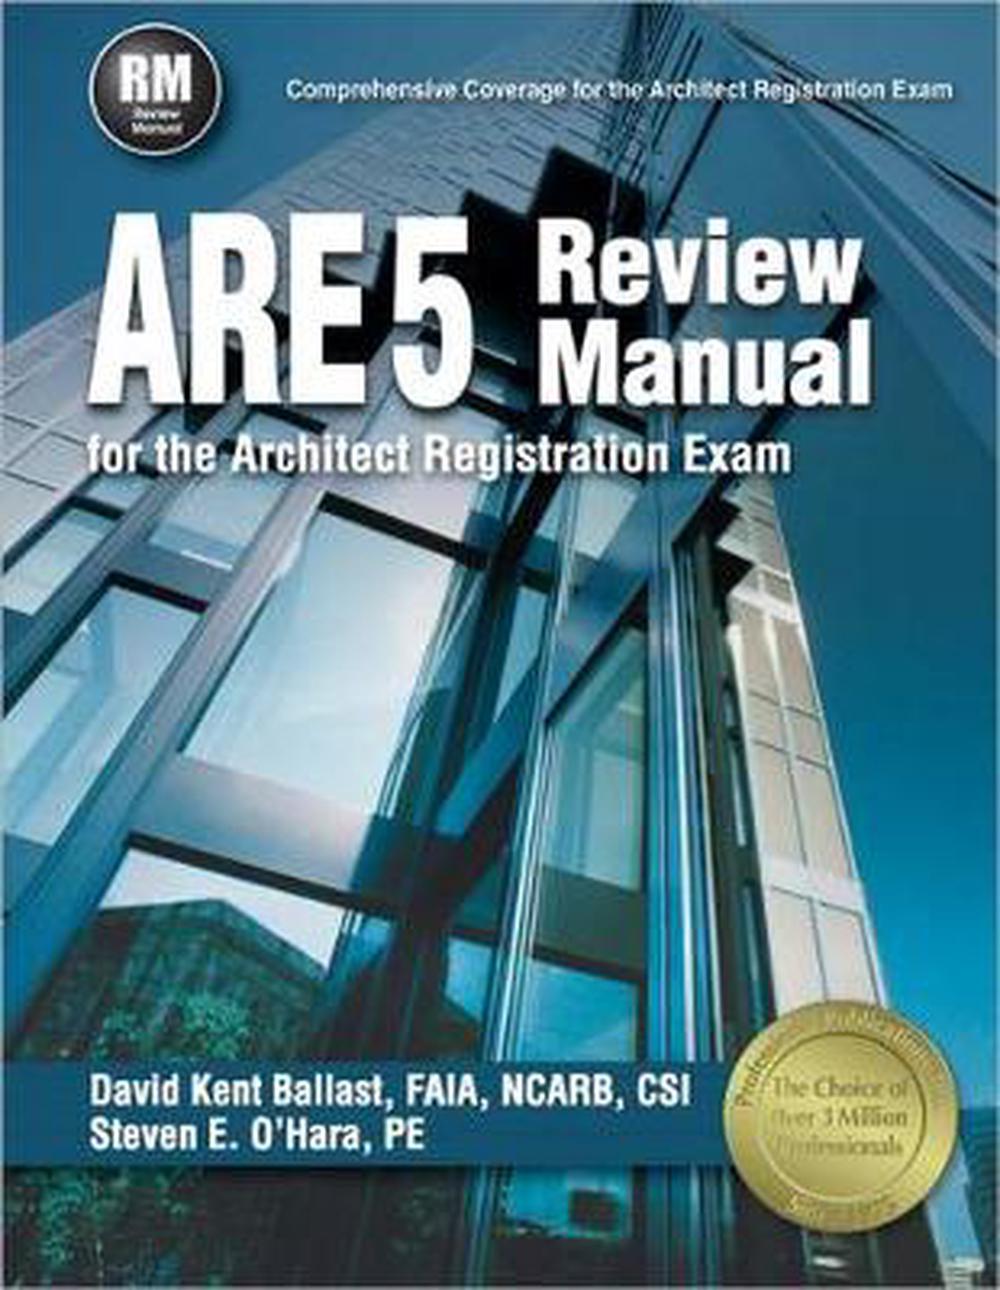 ARE 5 Review Manual for the Architect Registration Exam by David Kent